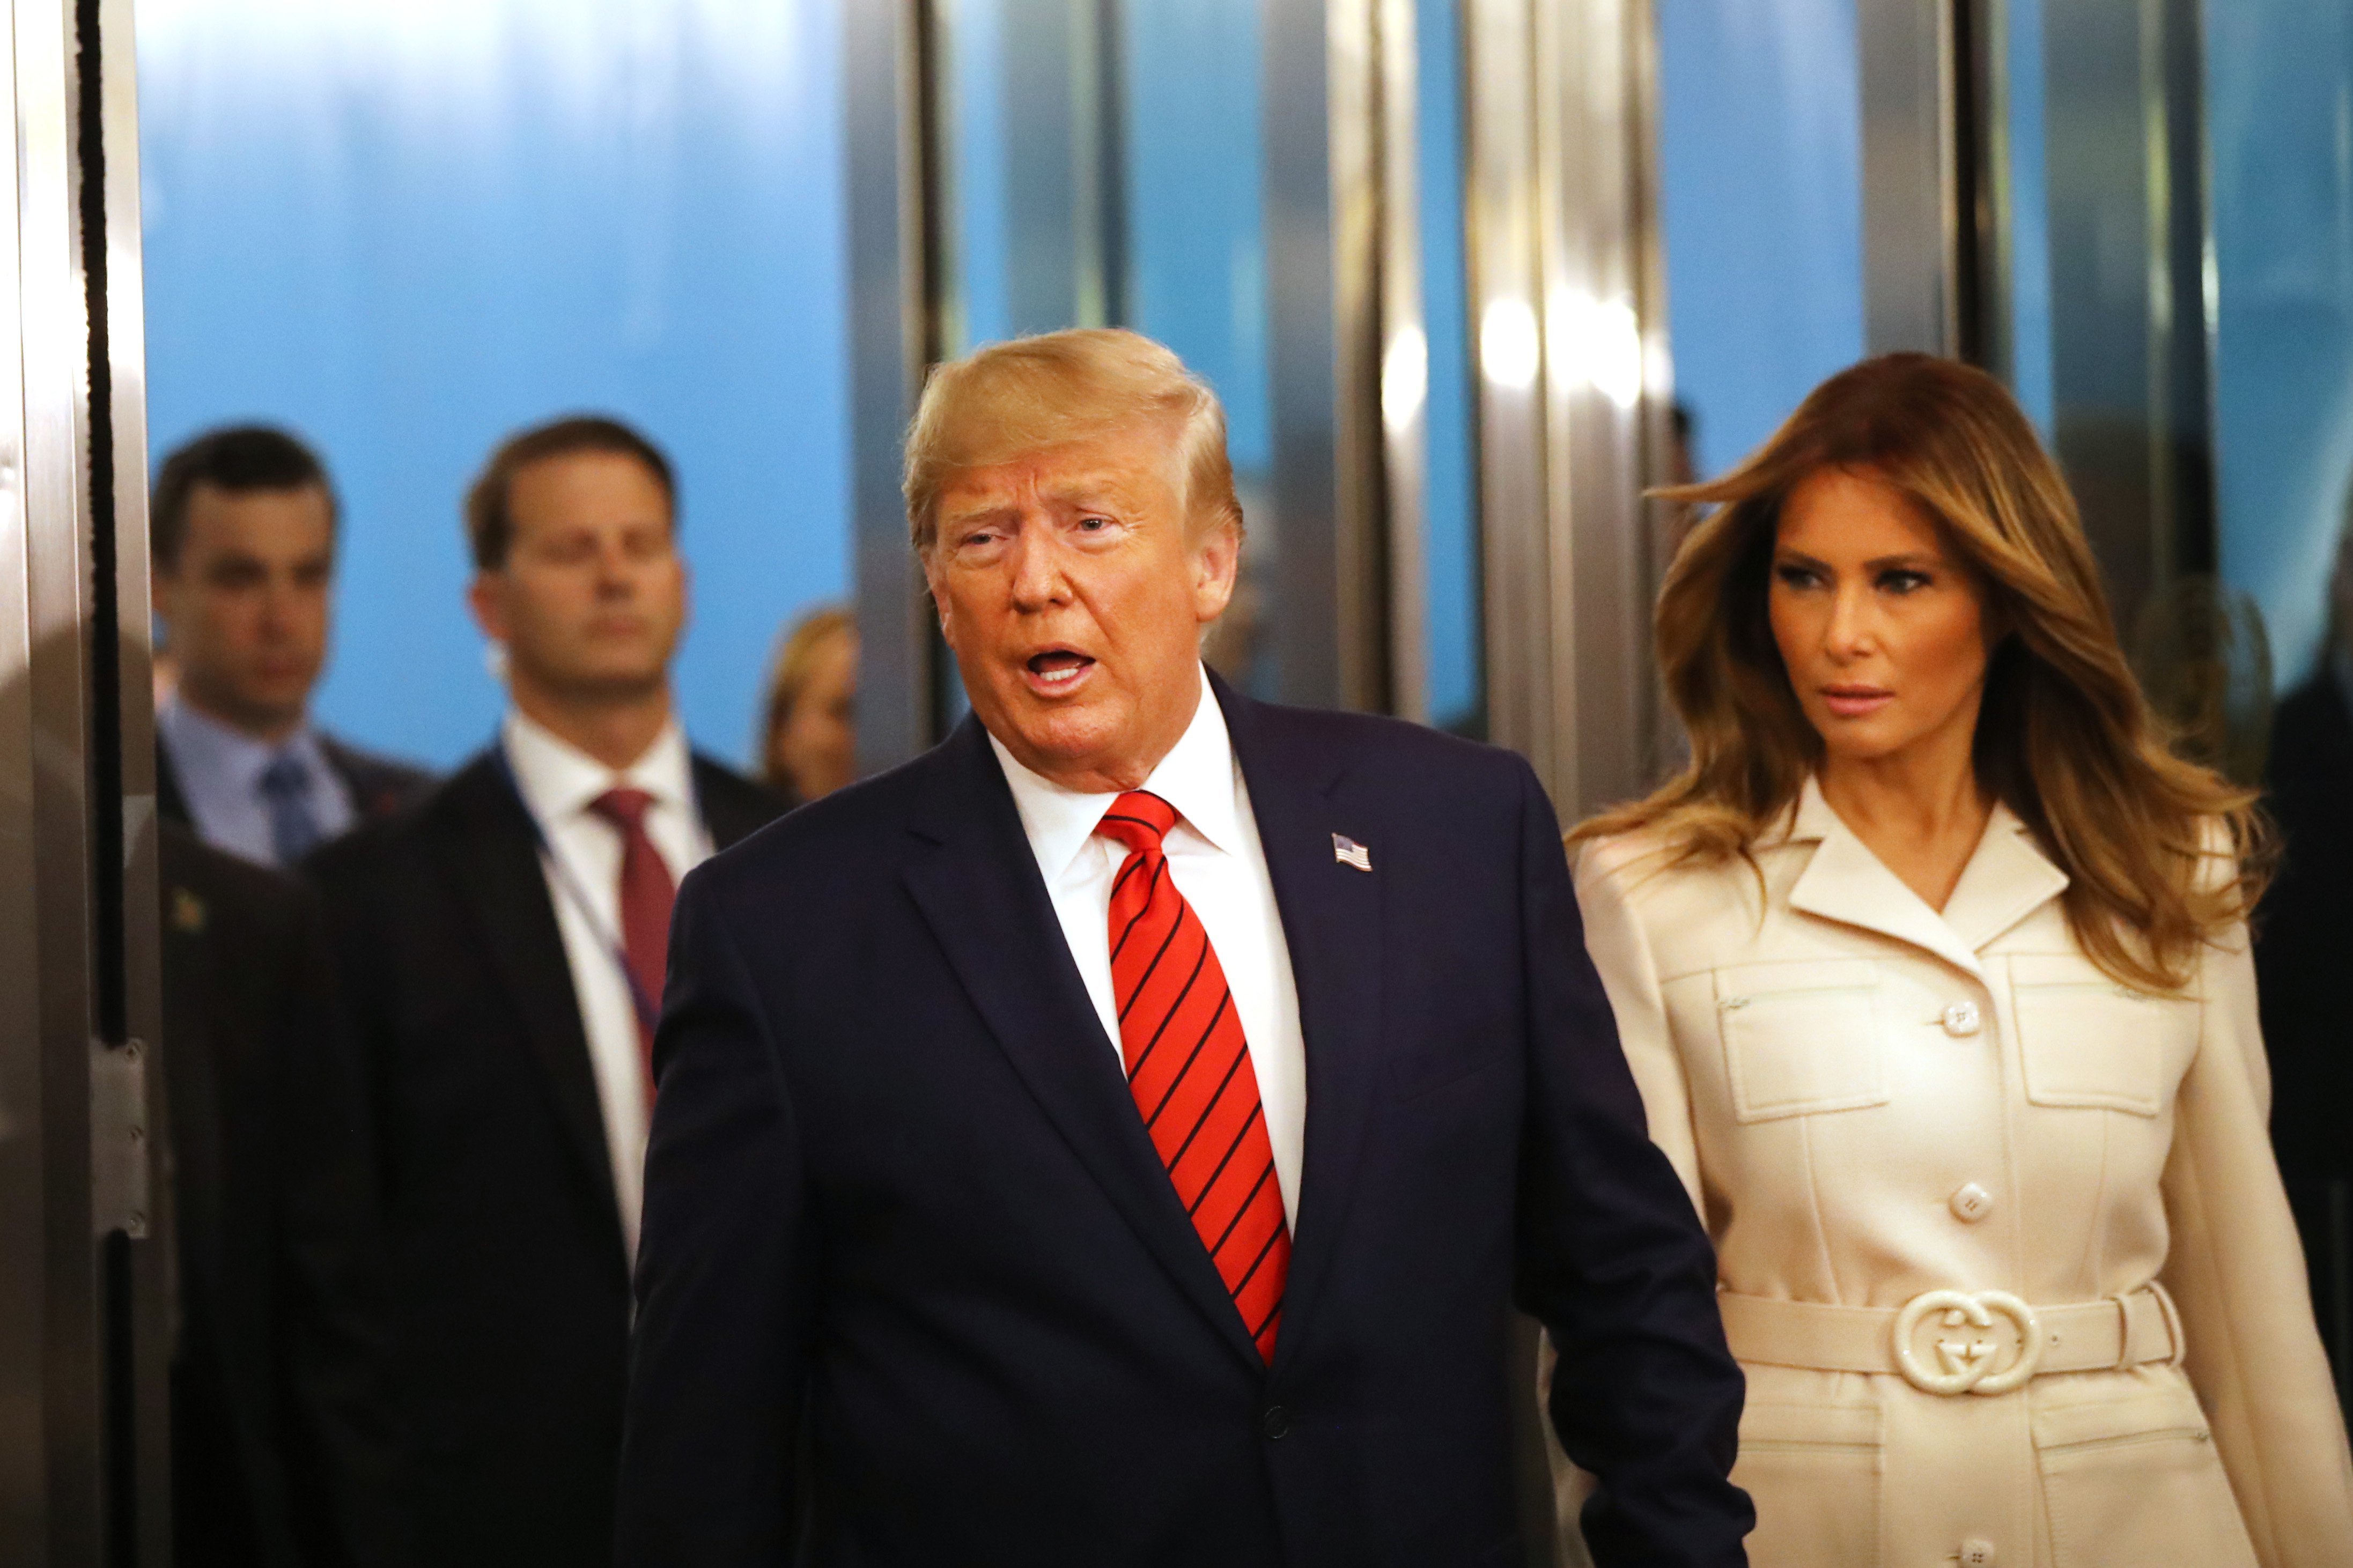 Donald Trump, accompanied by first lady Melania Trump, speaks to the media at the United Nations (U.N.) General Assembly on September 24, 2019 | Photo: GettyImages